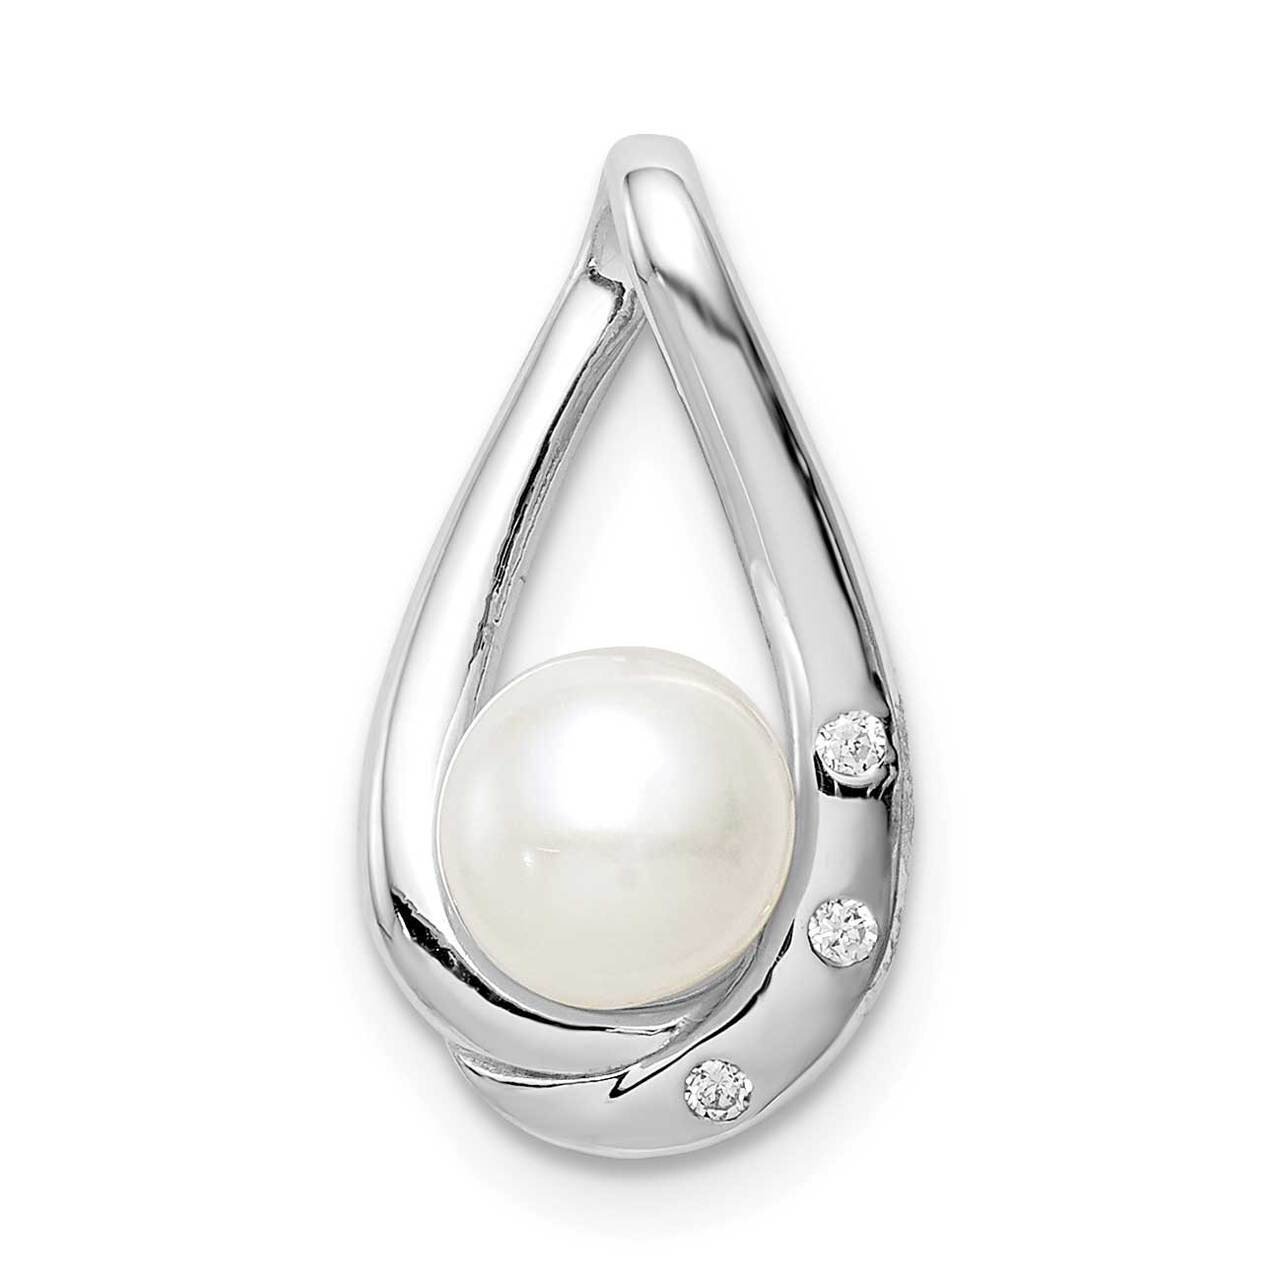 (6-7mm) Freshwater Cultured Pearl Teardrop Chain Slide Sterling Silver Rhodium-plated CZ Diamond QP5348